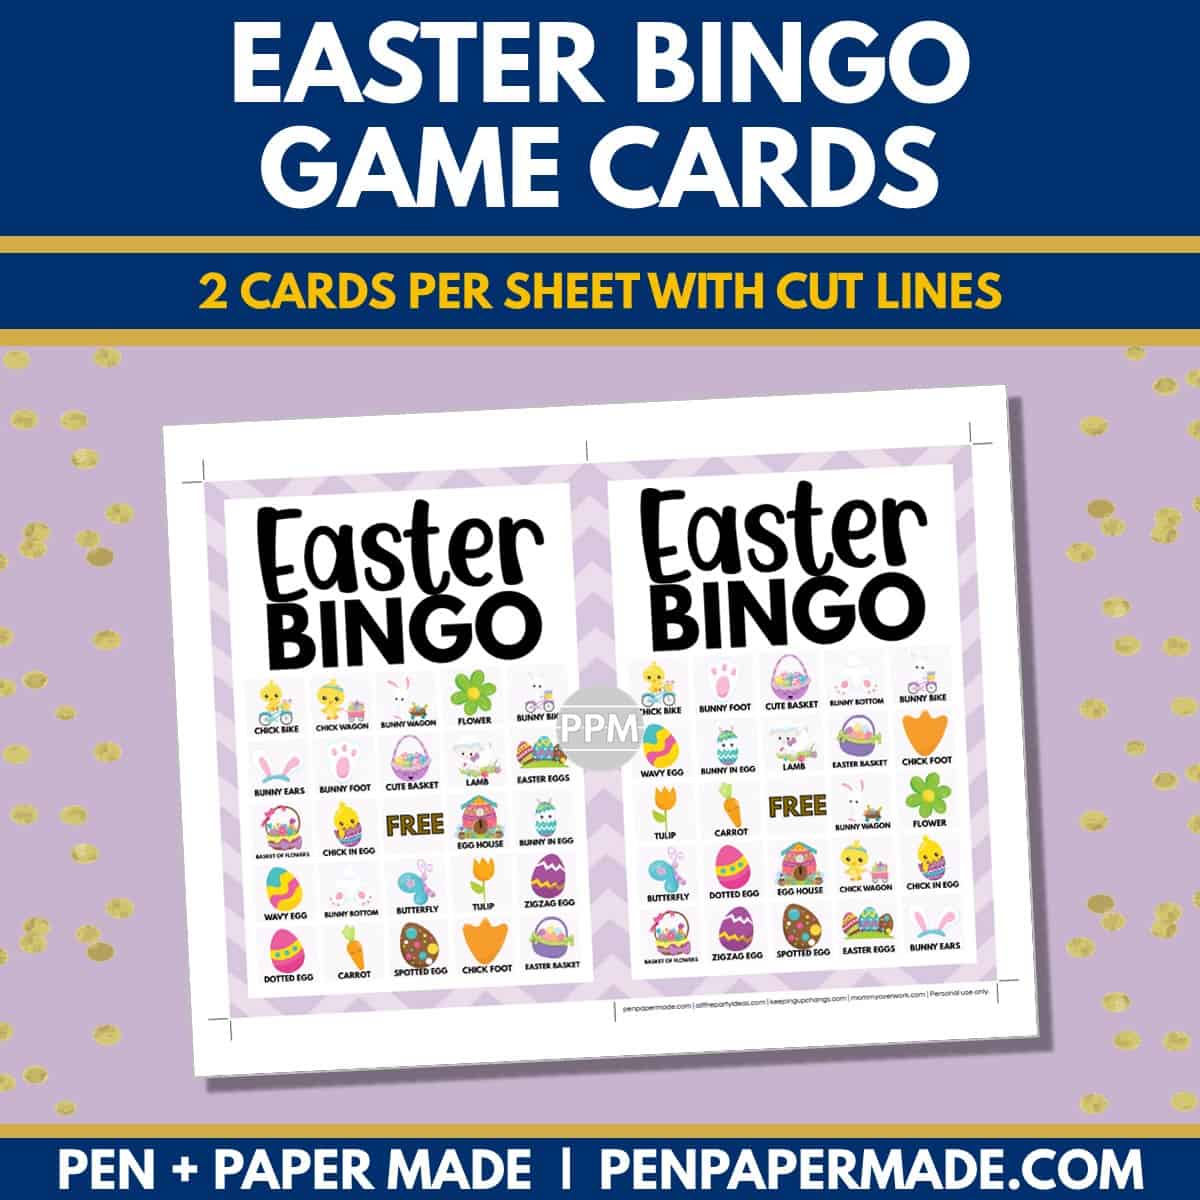 easter bingo card 5x5 5x7 game boards with images and text words.